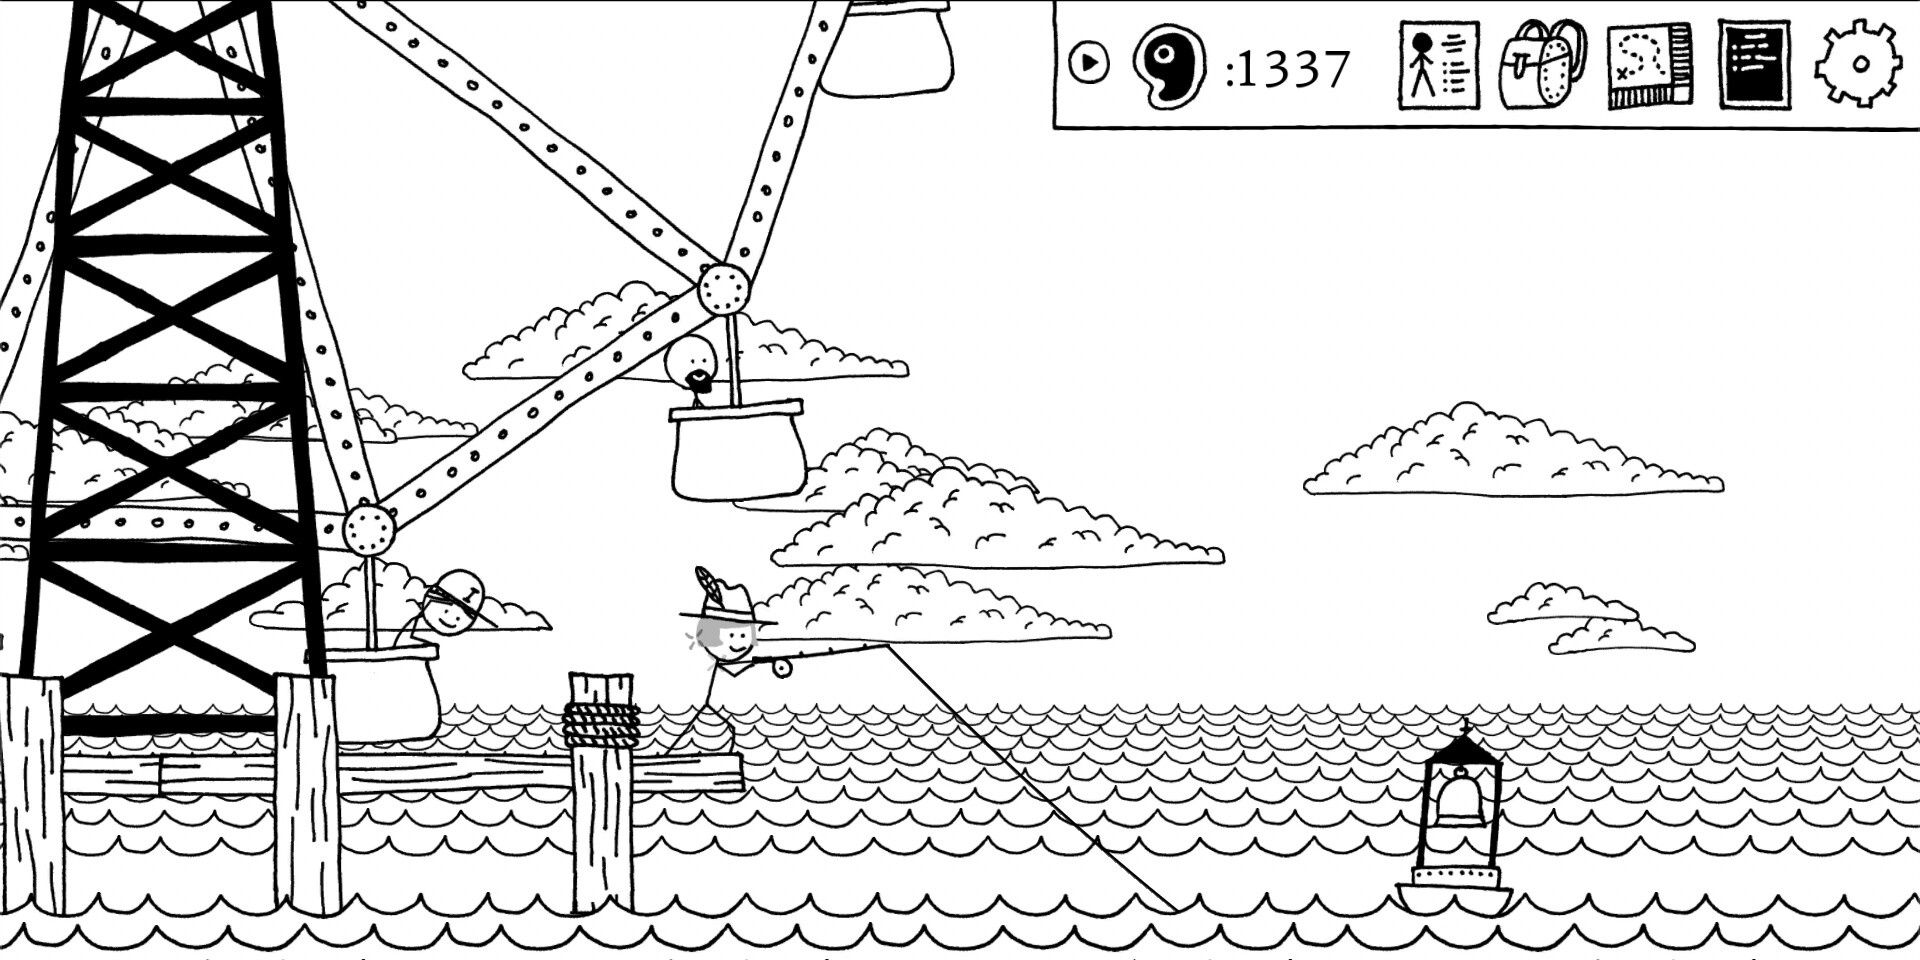 The main character fishing near a ferris wheel in Shadows Over Loathing